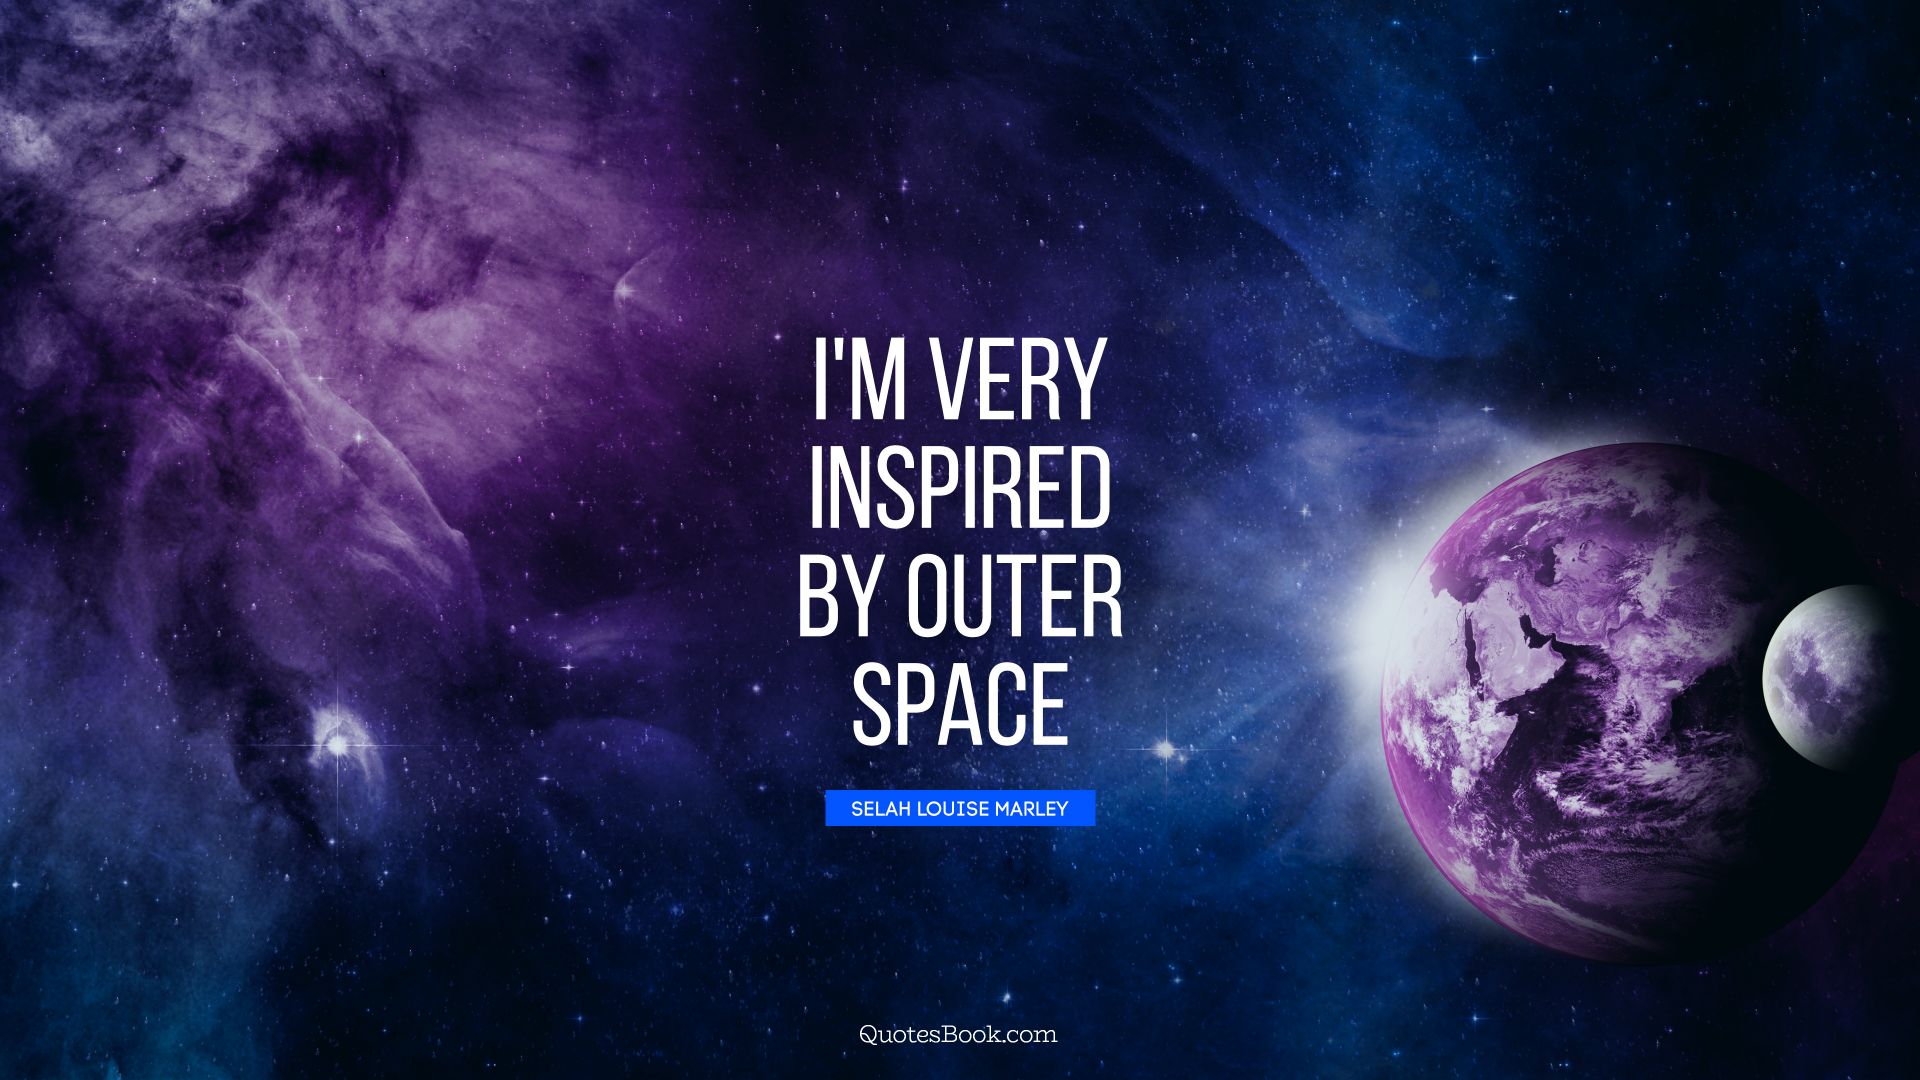 I'm very inspired by outer space. - Quote by Selah Louise Marley